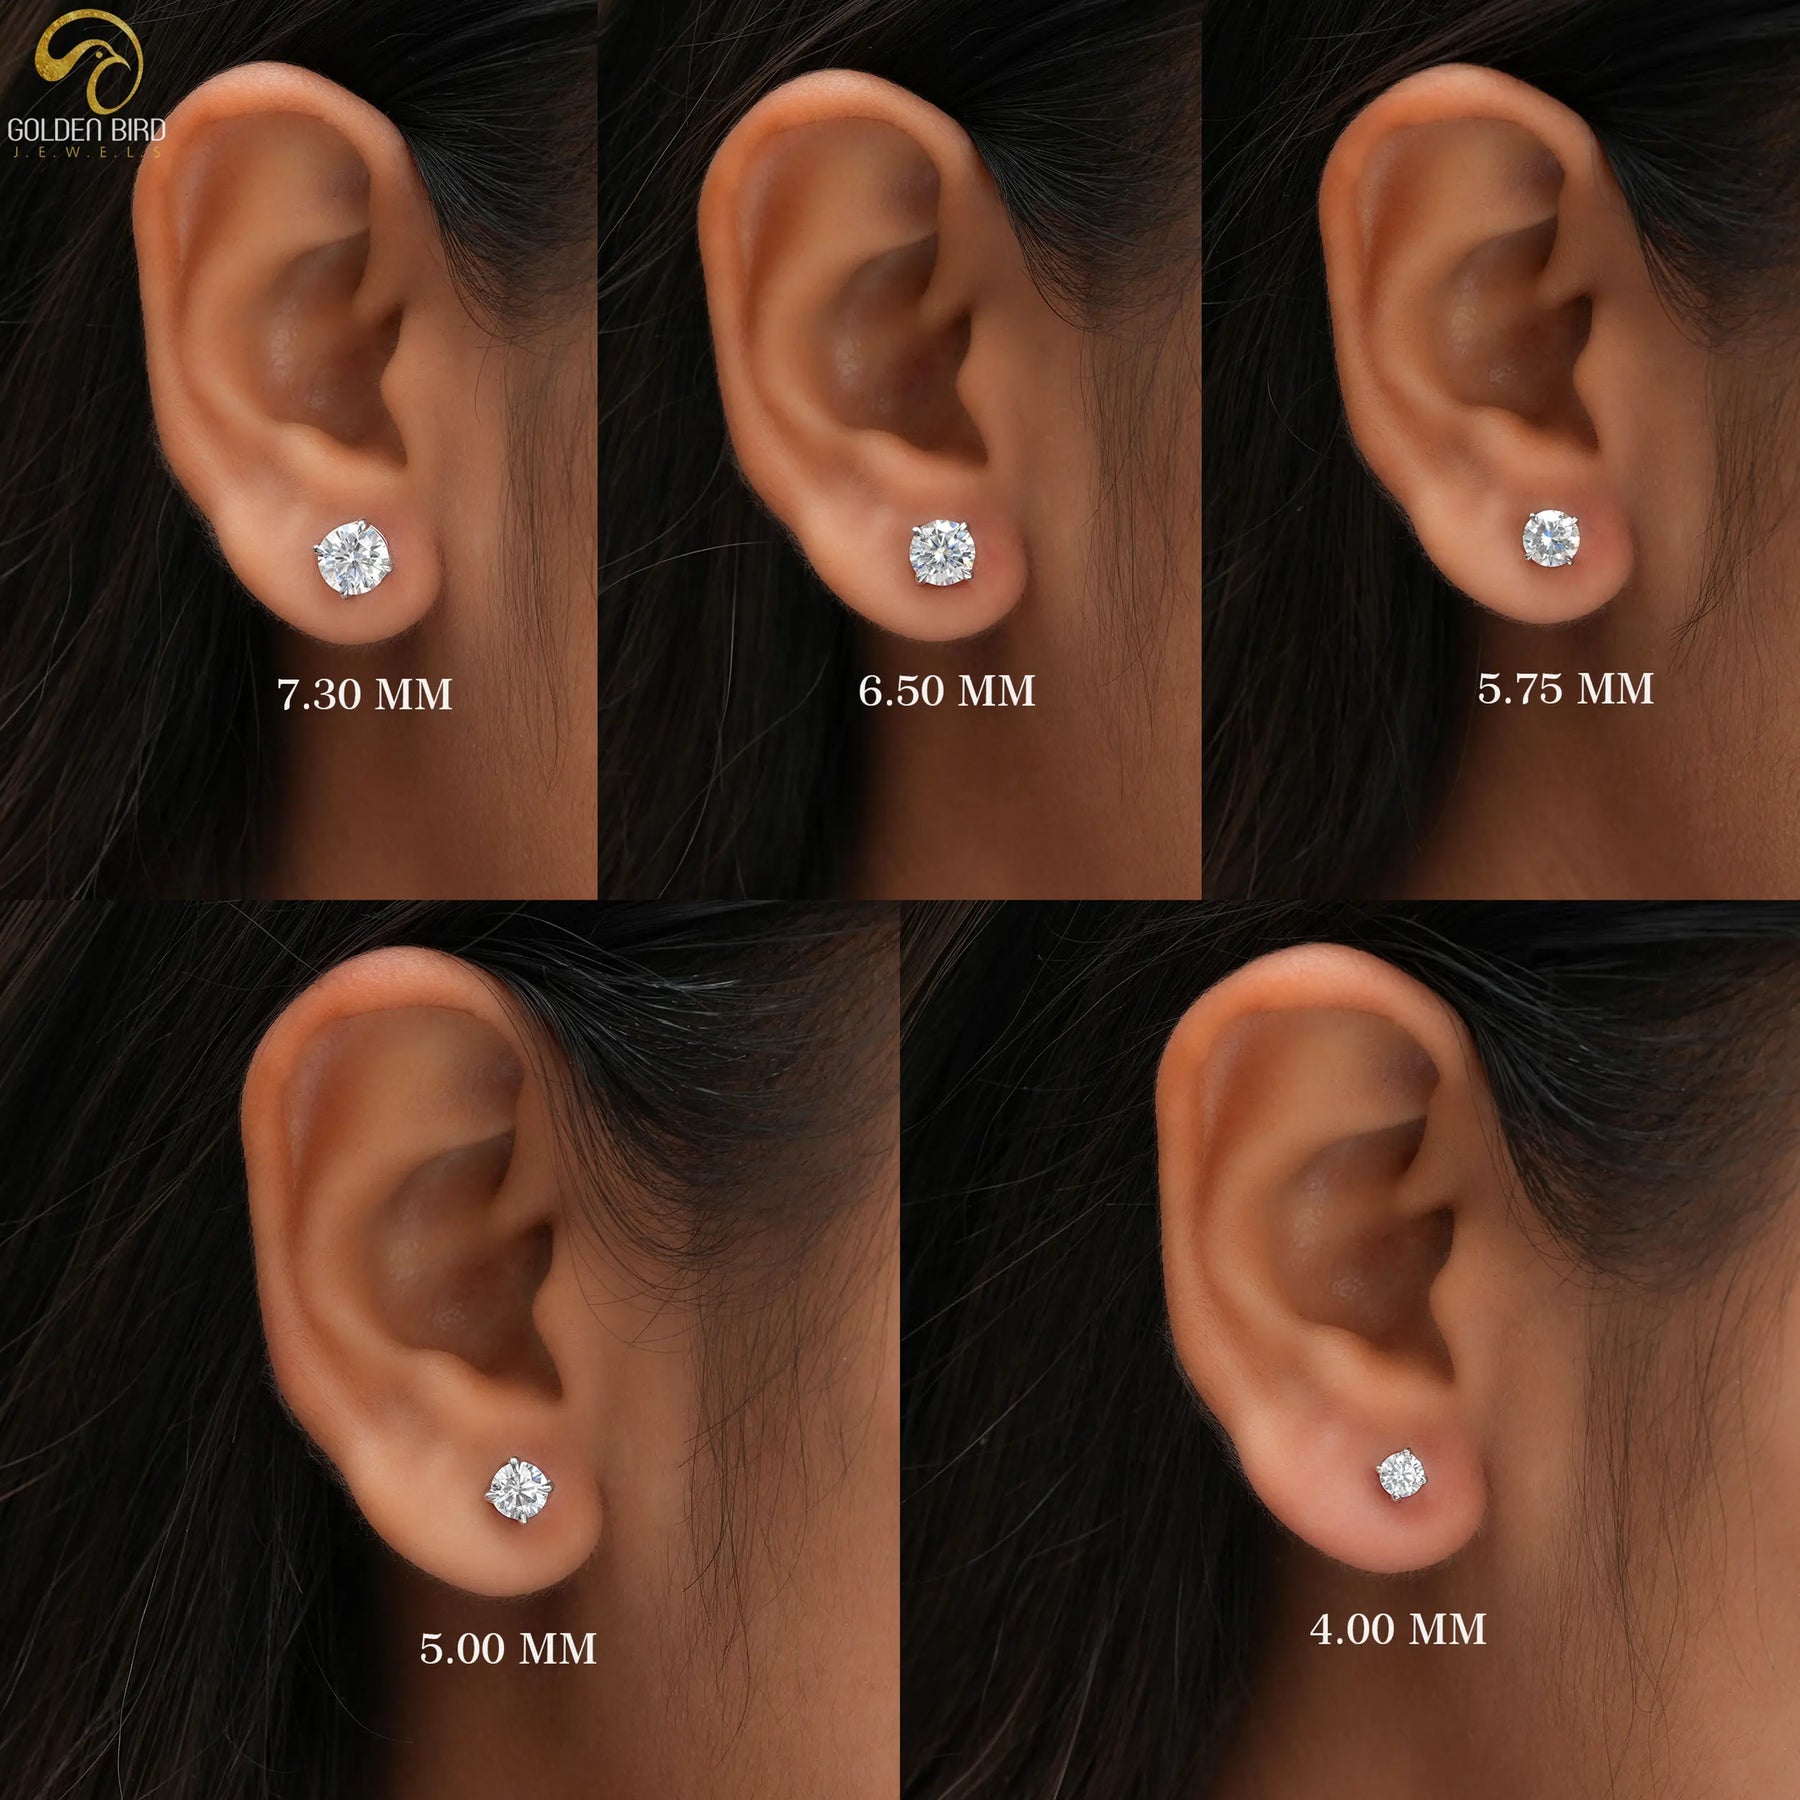 In Ear Different Carat Weight Round Cut Moissanite Stud Earrings In One Photos